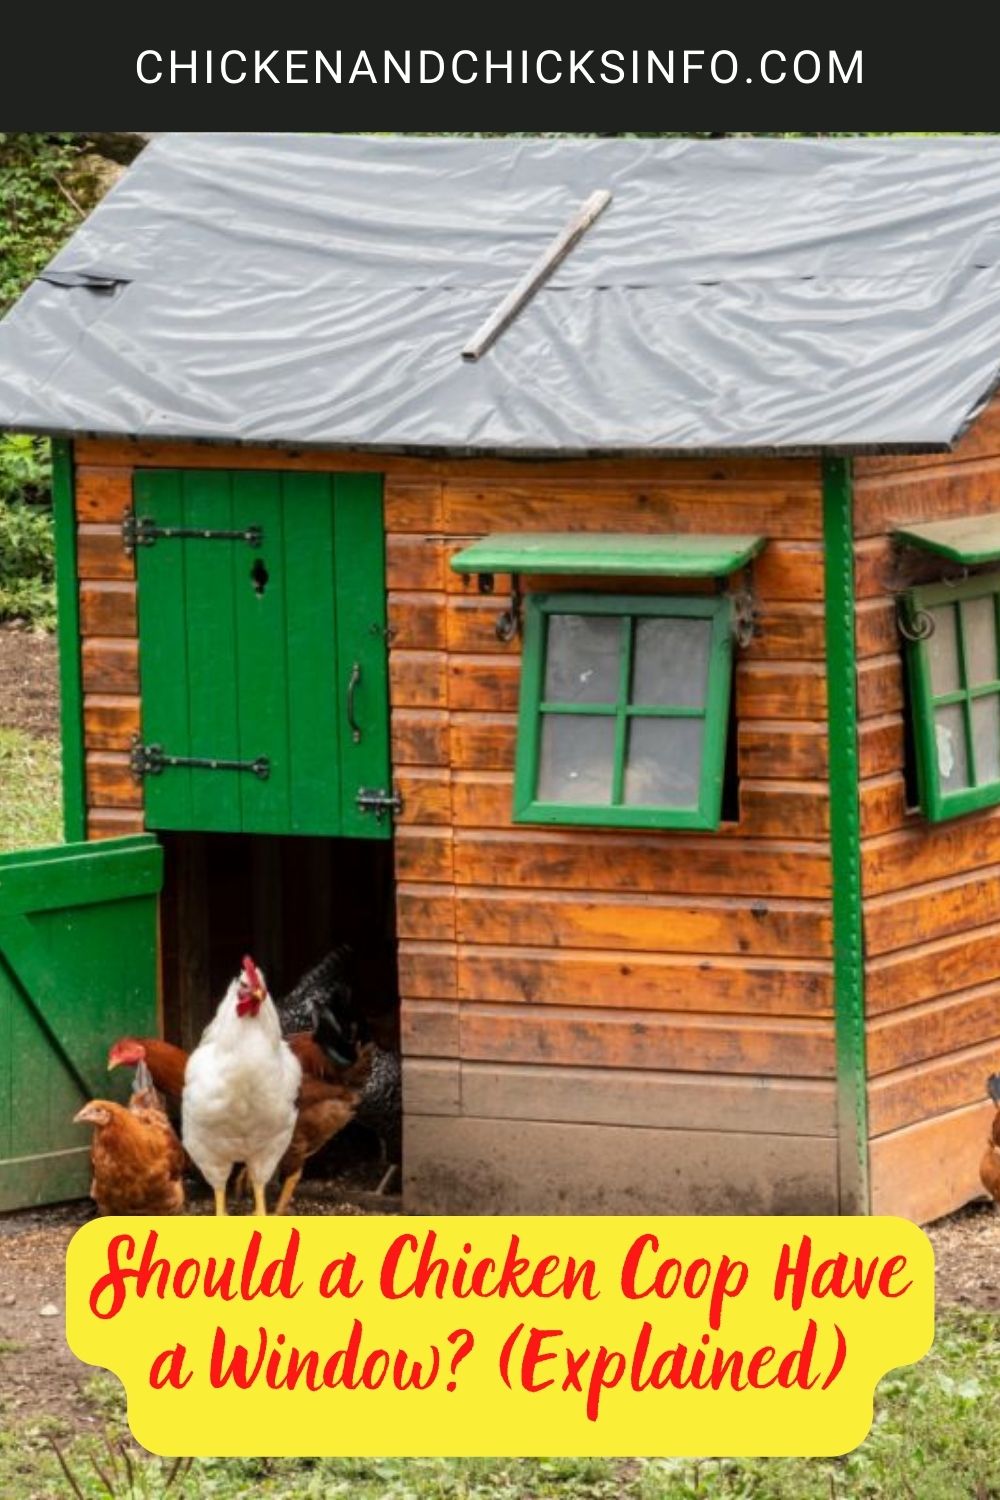 Should a Chicken Coop Have a Window? (Explained) poster.